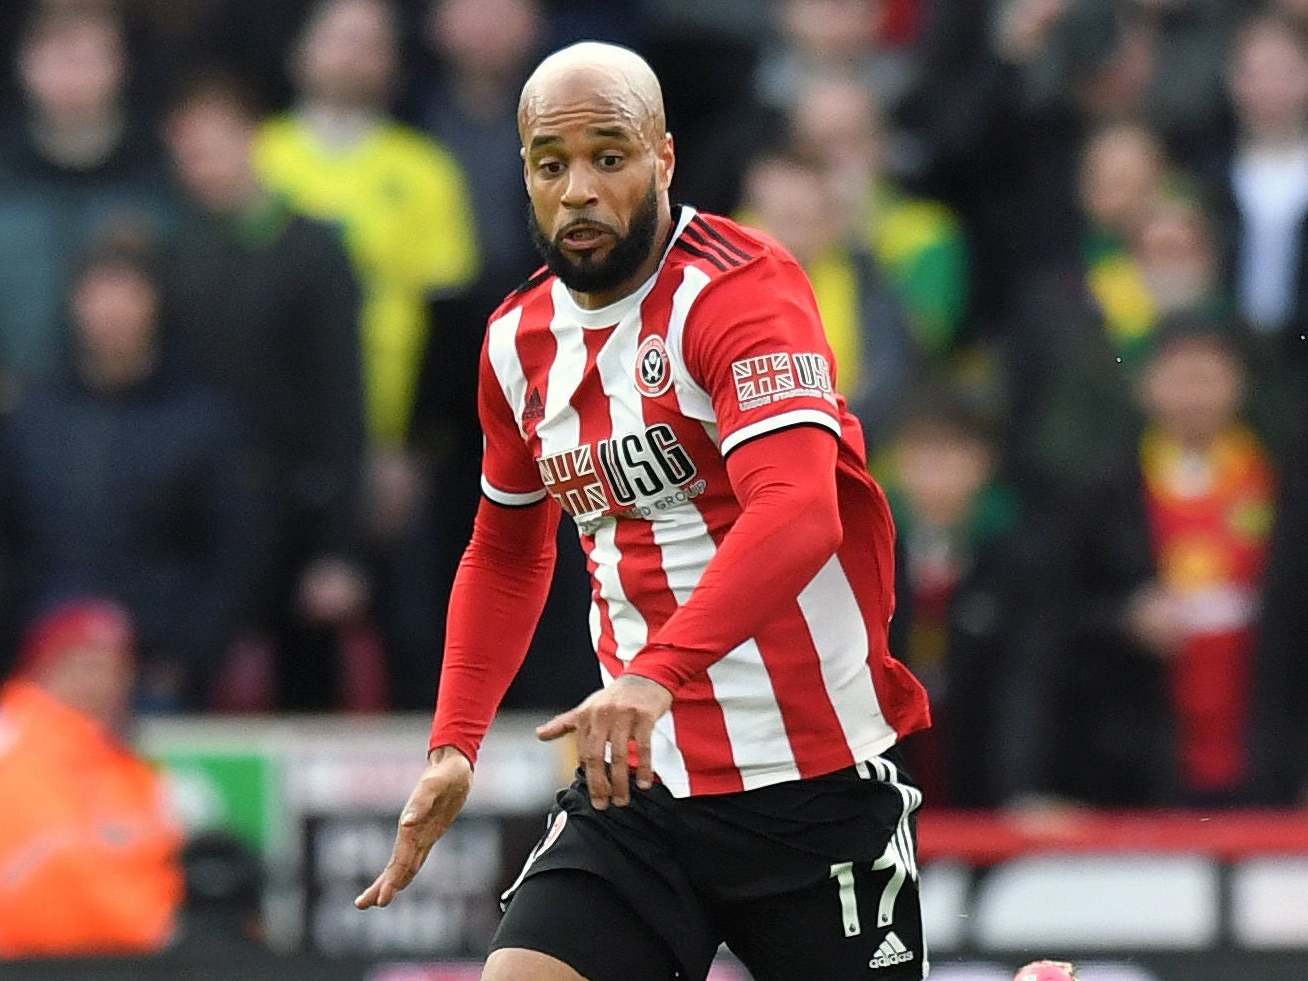 David McGoldrick revealed a racially abusive message that he received on Instagram